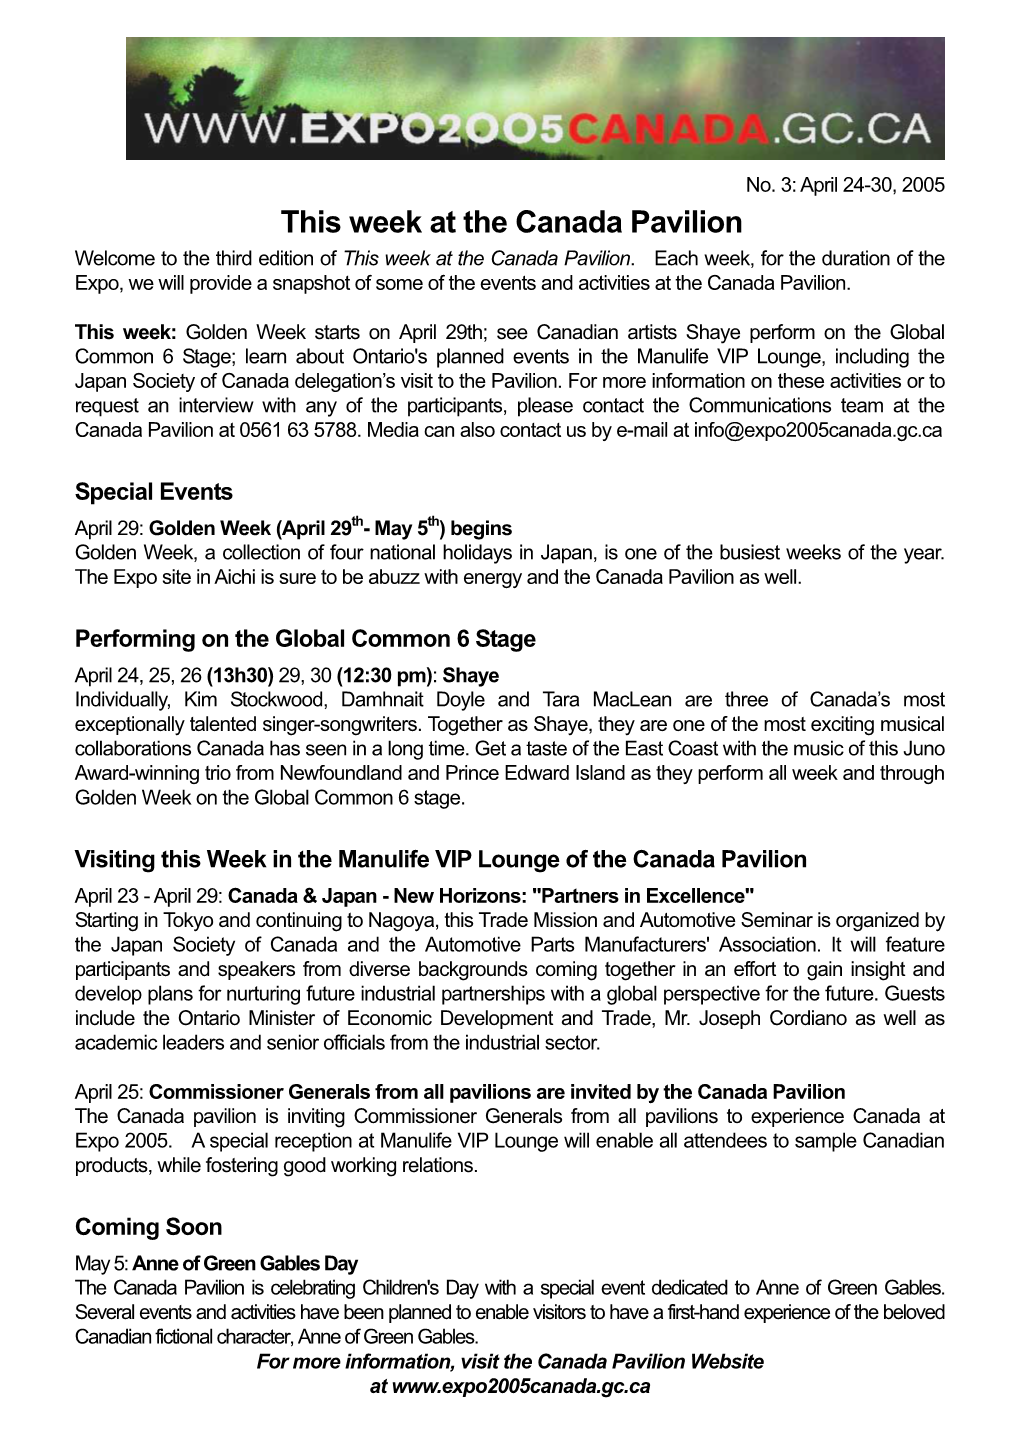 This Week at the Canada Pavilion Welcome to the Third Edition of This Week at the Canada Pavilion